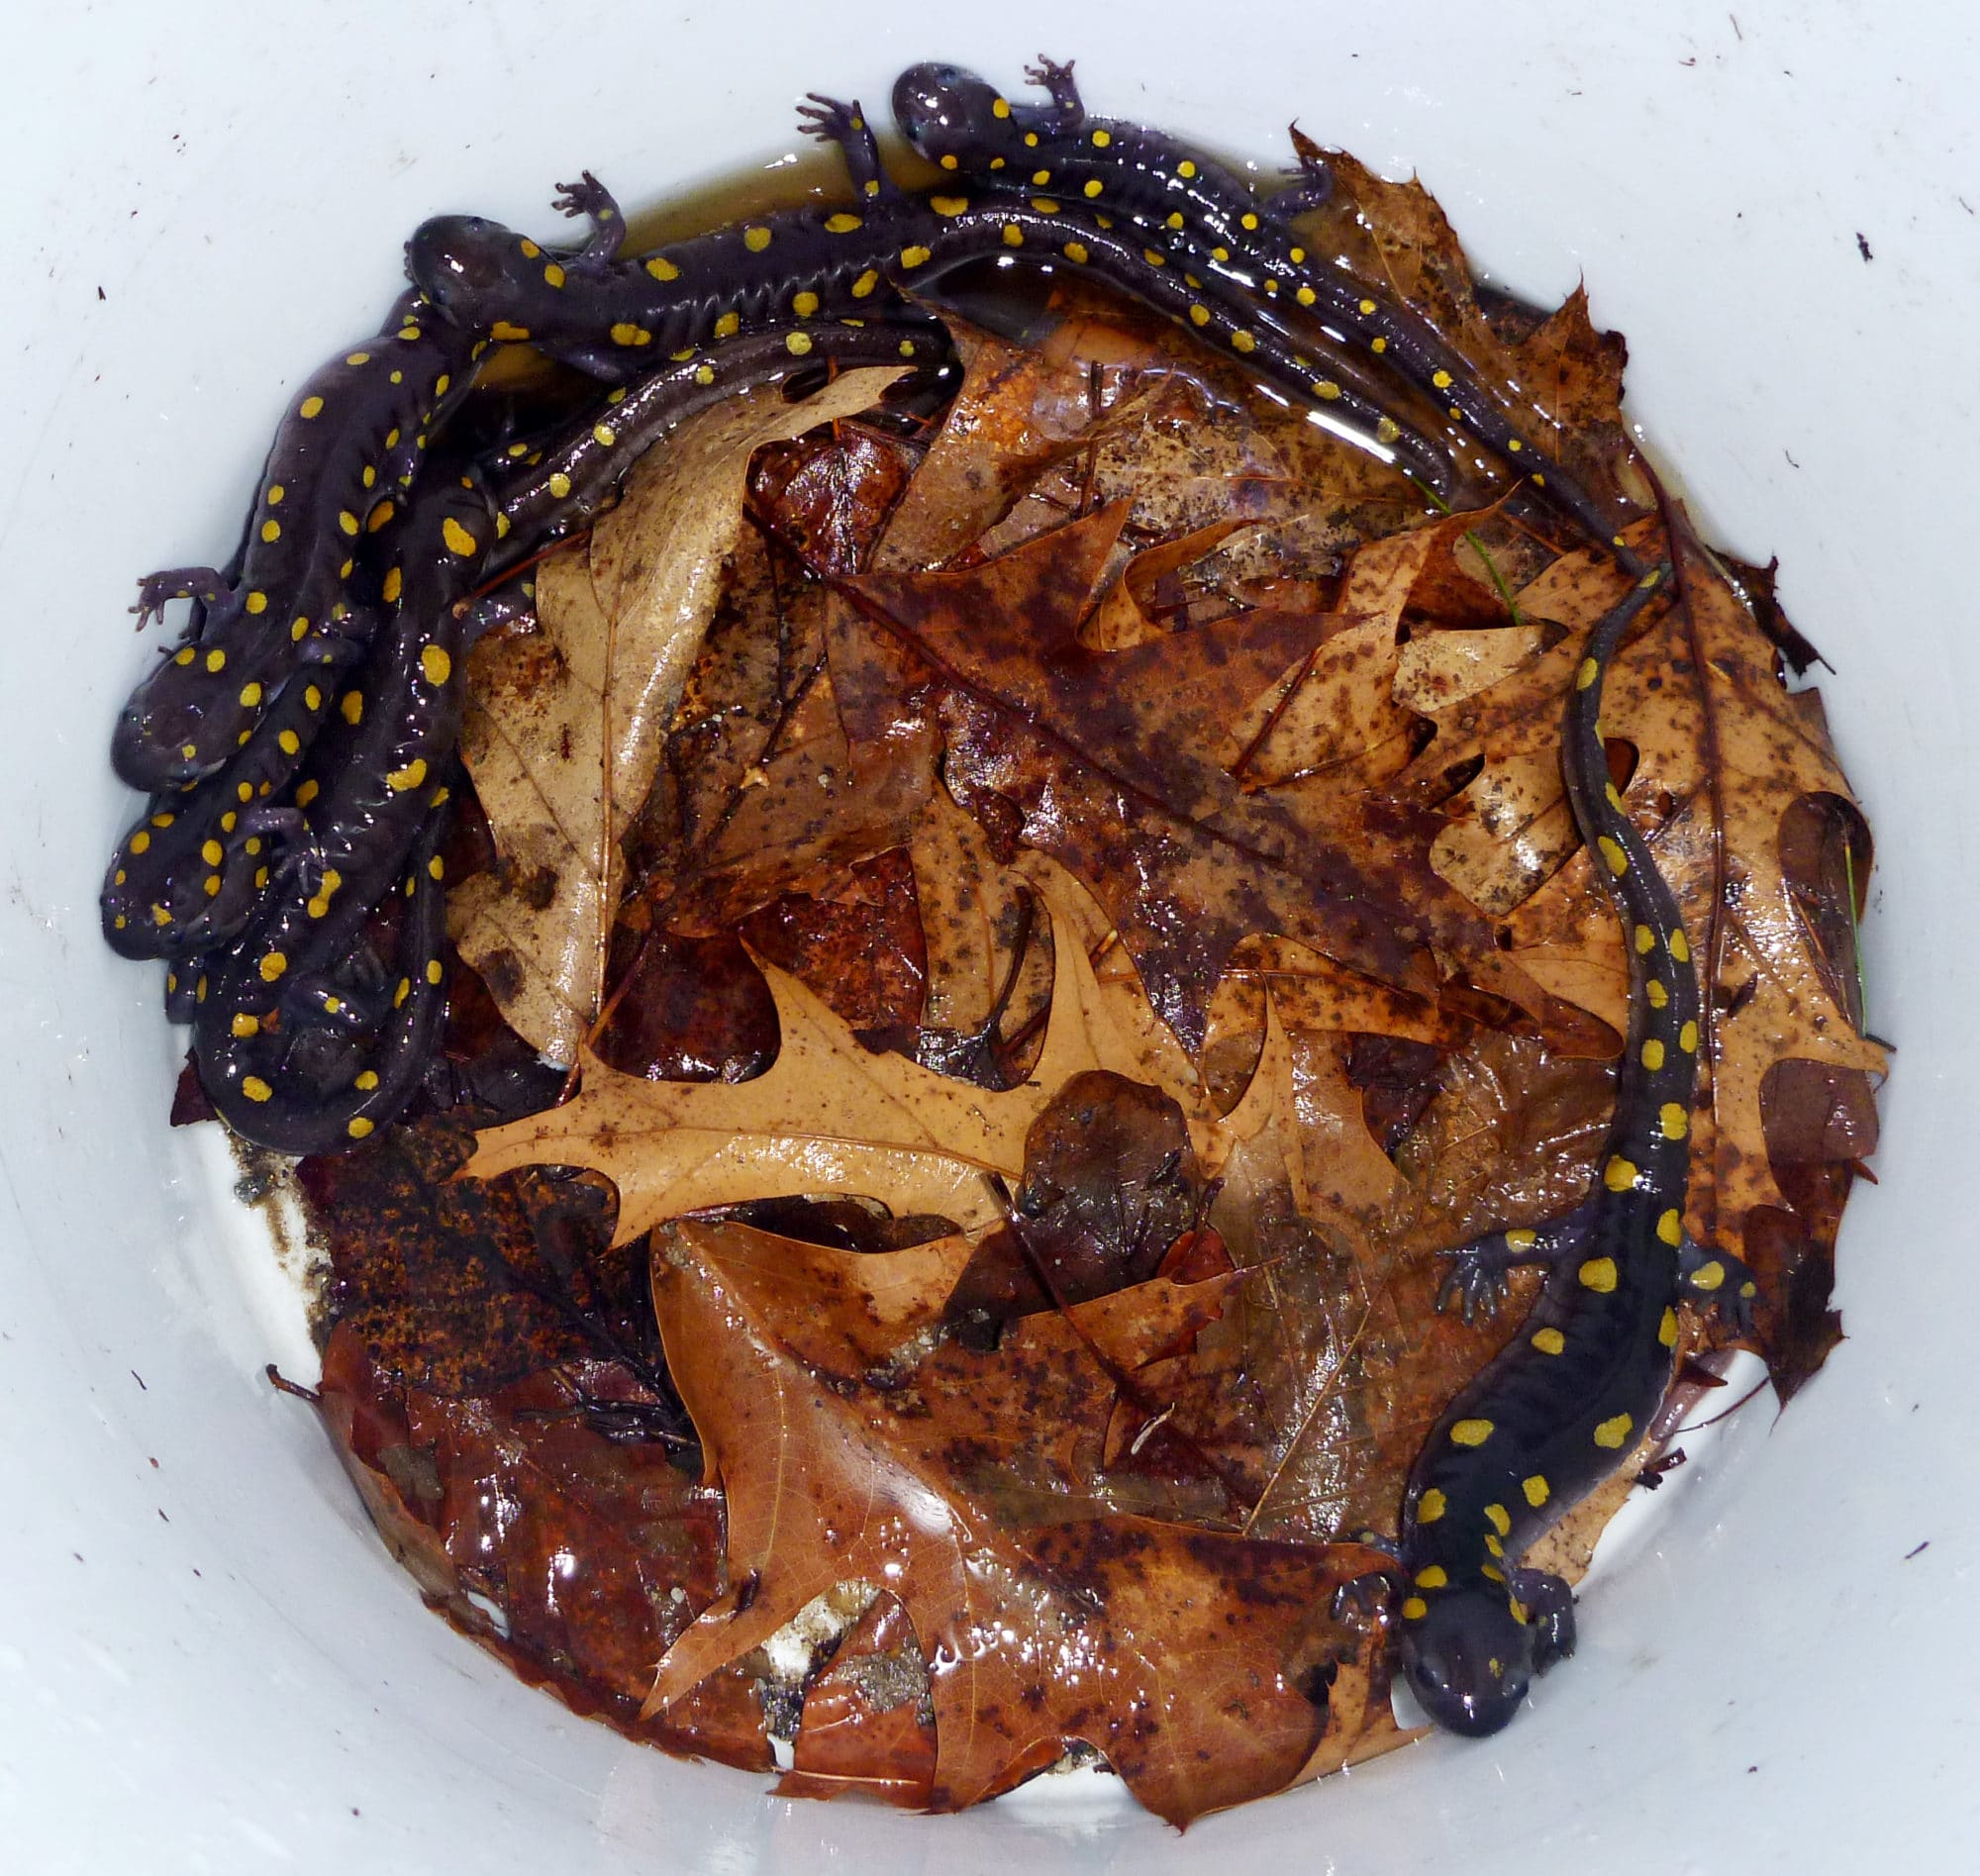 A bucket of spotted salamanders, rescued from Route 9 in Antrim on April 11, 2016. (photo © Nathan Schaefer)